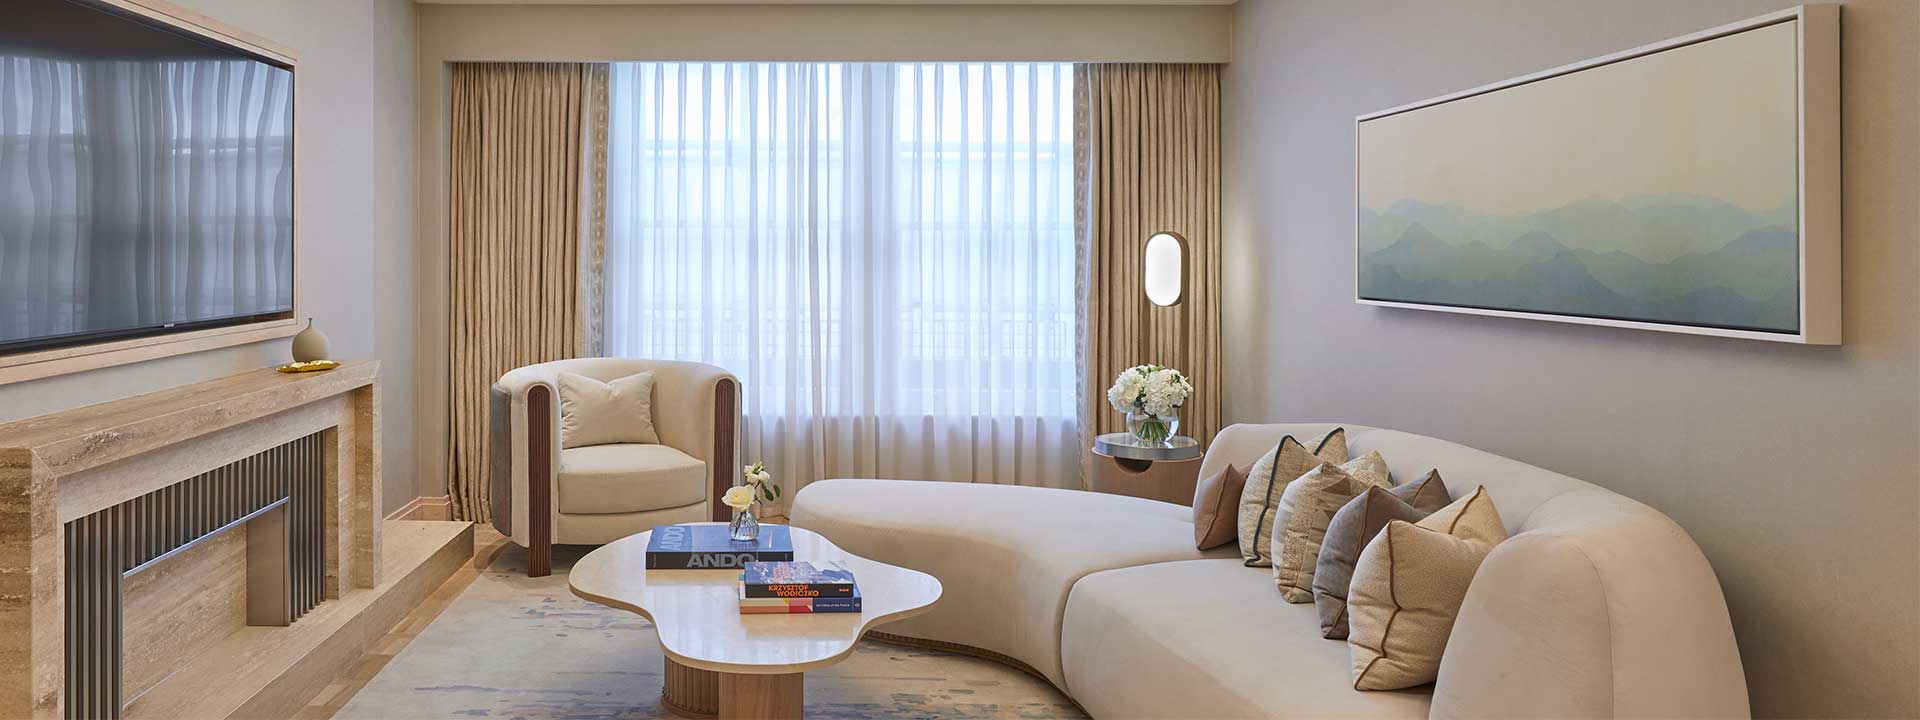 Mayfair suite detail with white couch, design coffee table, armchair and TV